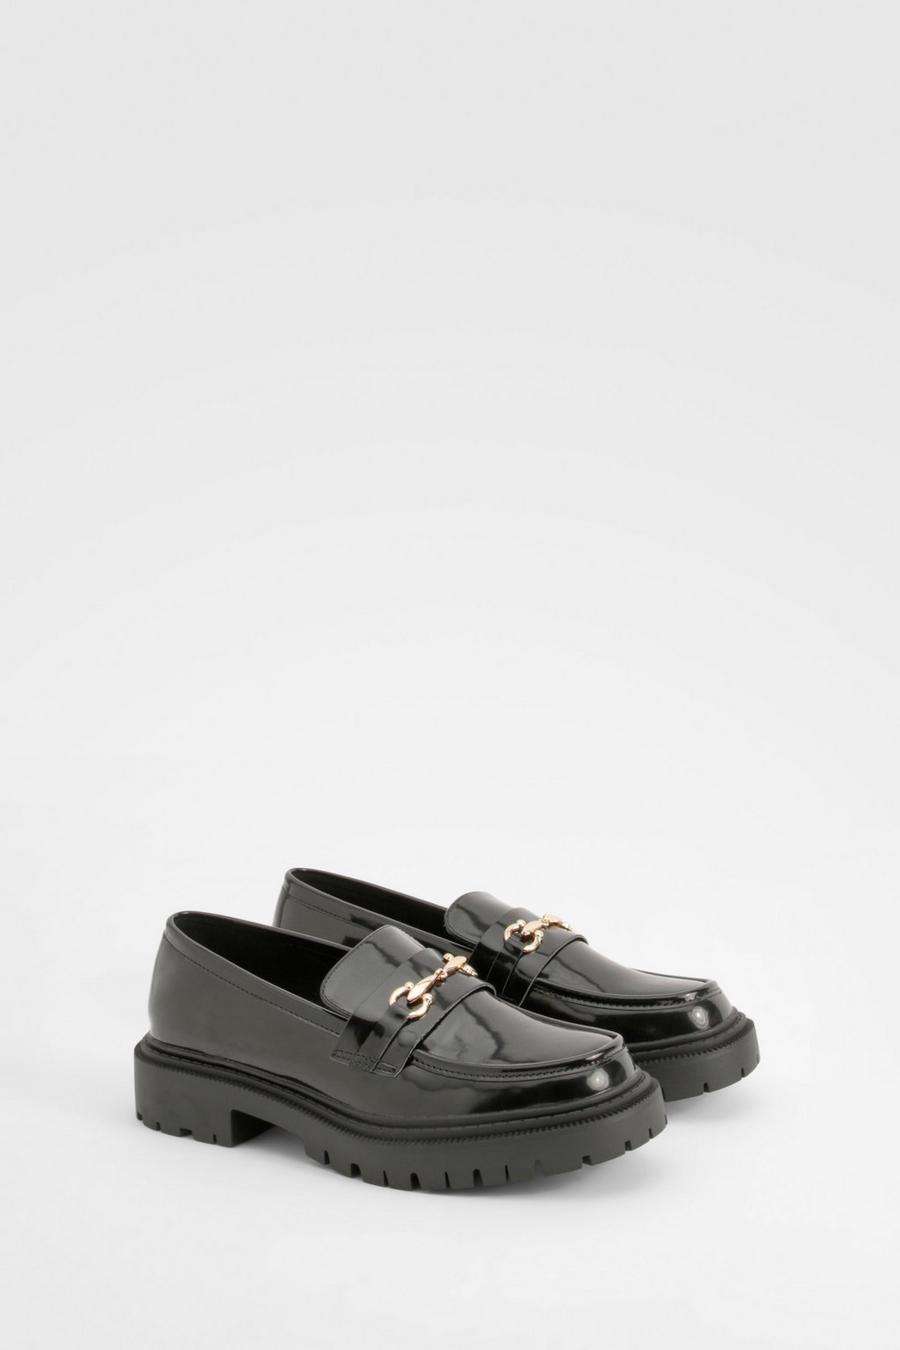 Black T Bar Patent Chunky Loafers     